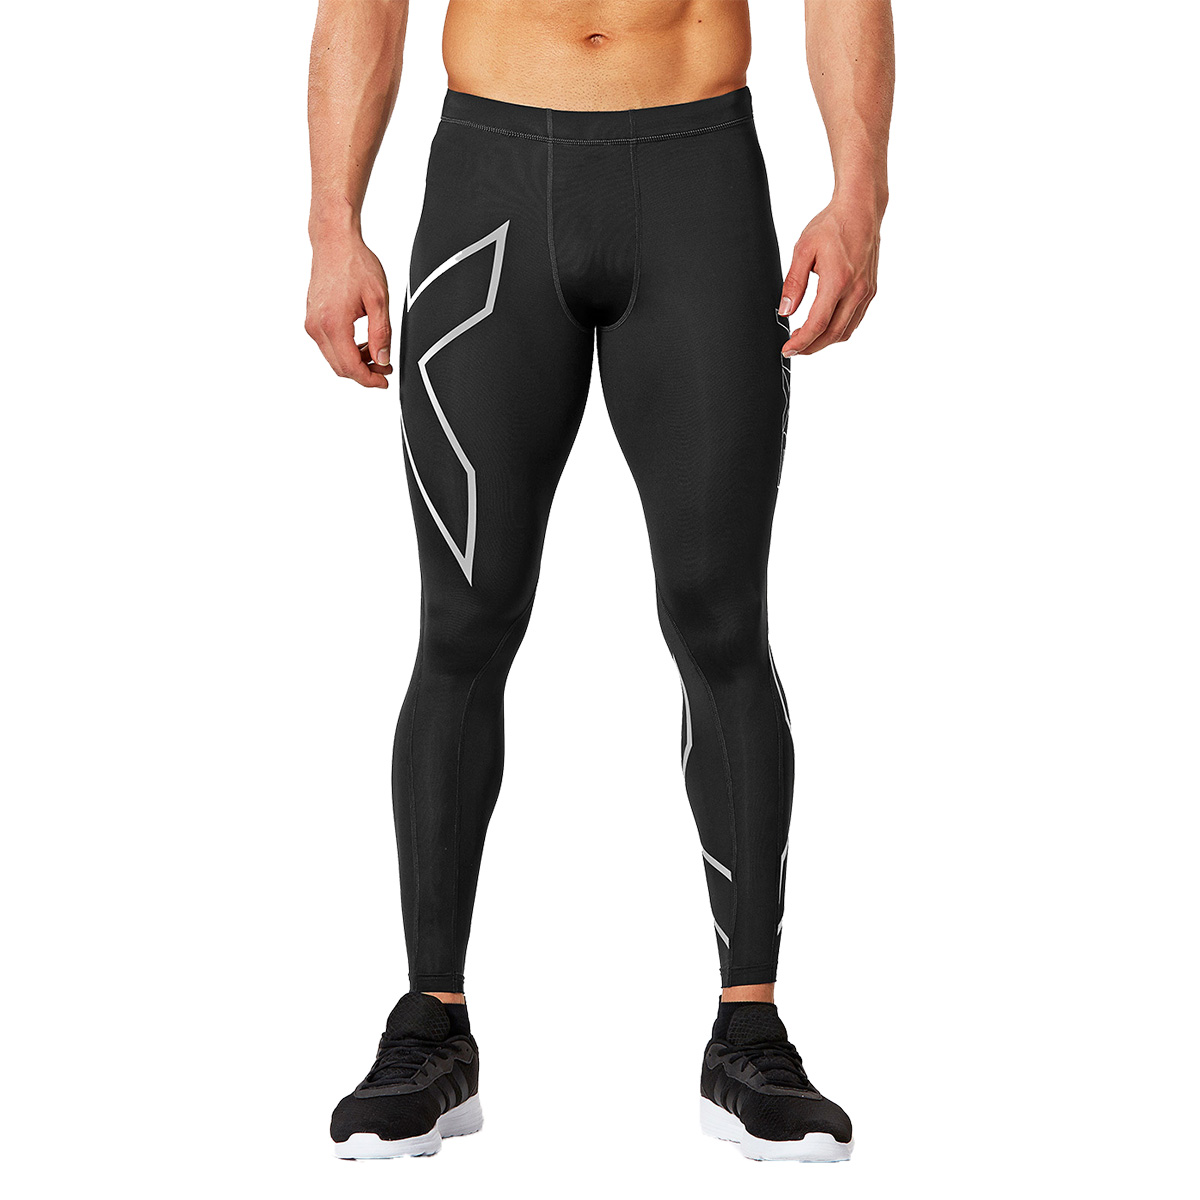 2XU Compression Tight, , large image number null